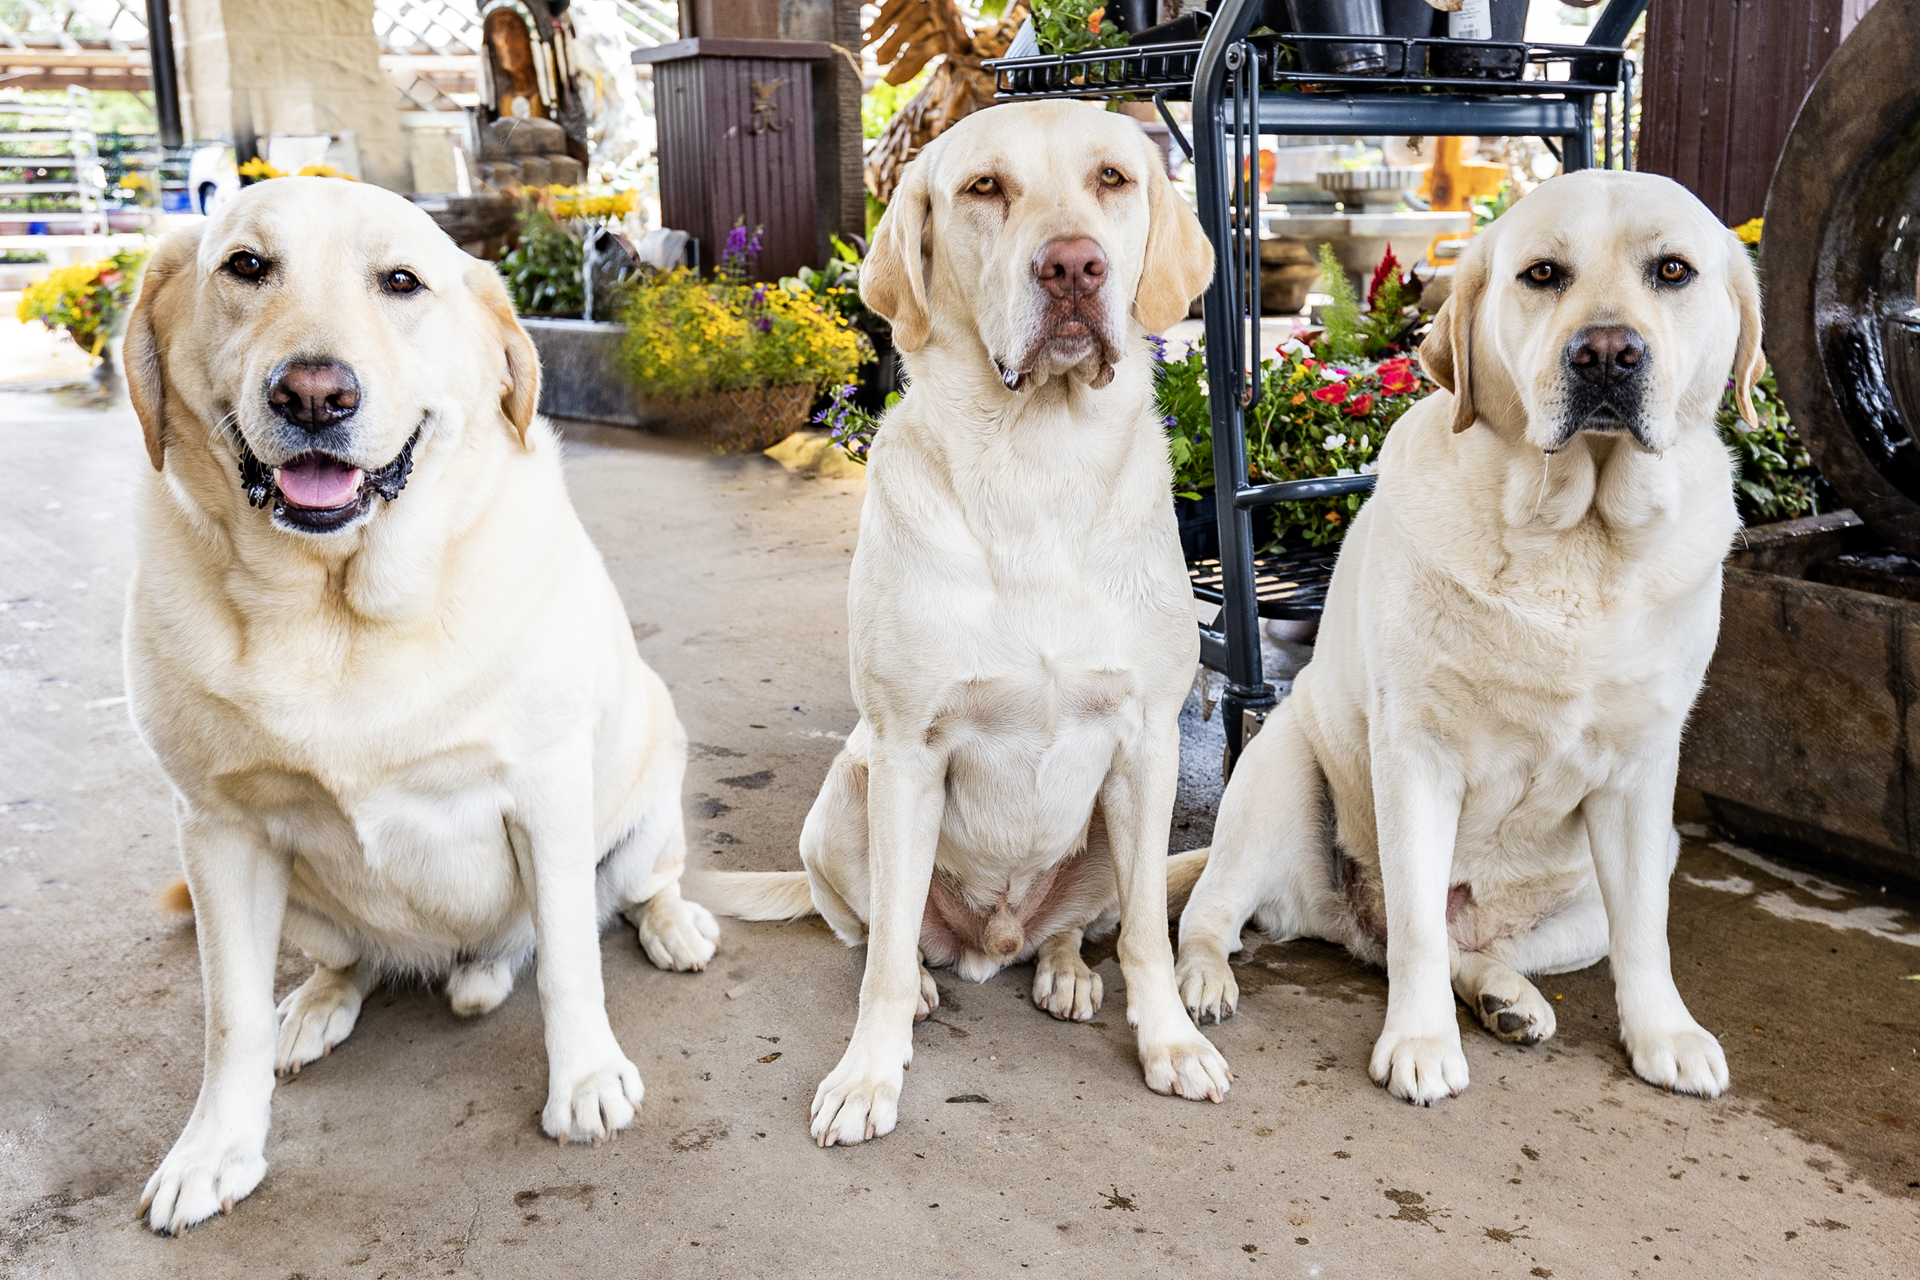 Three white dogs are sitting next to each other on the ground.